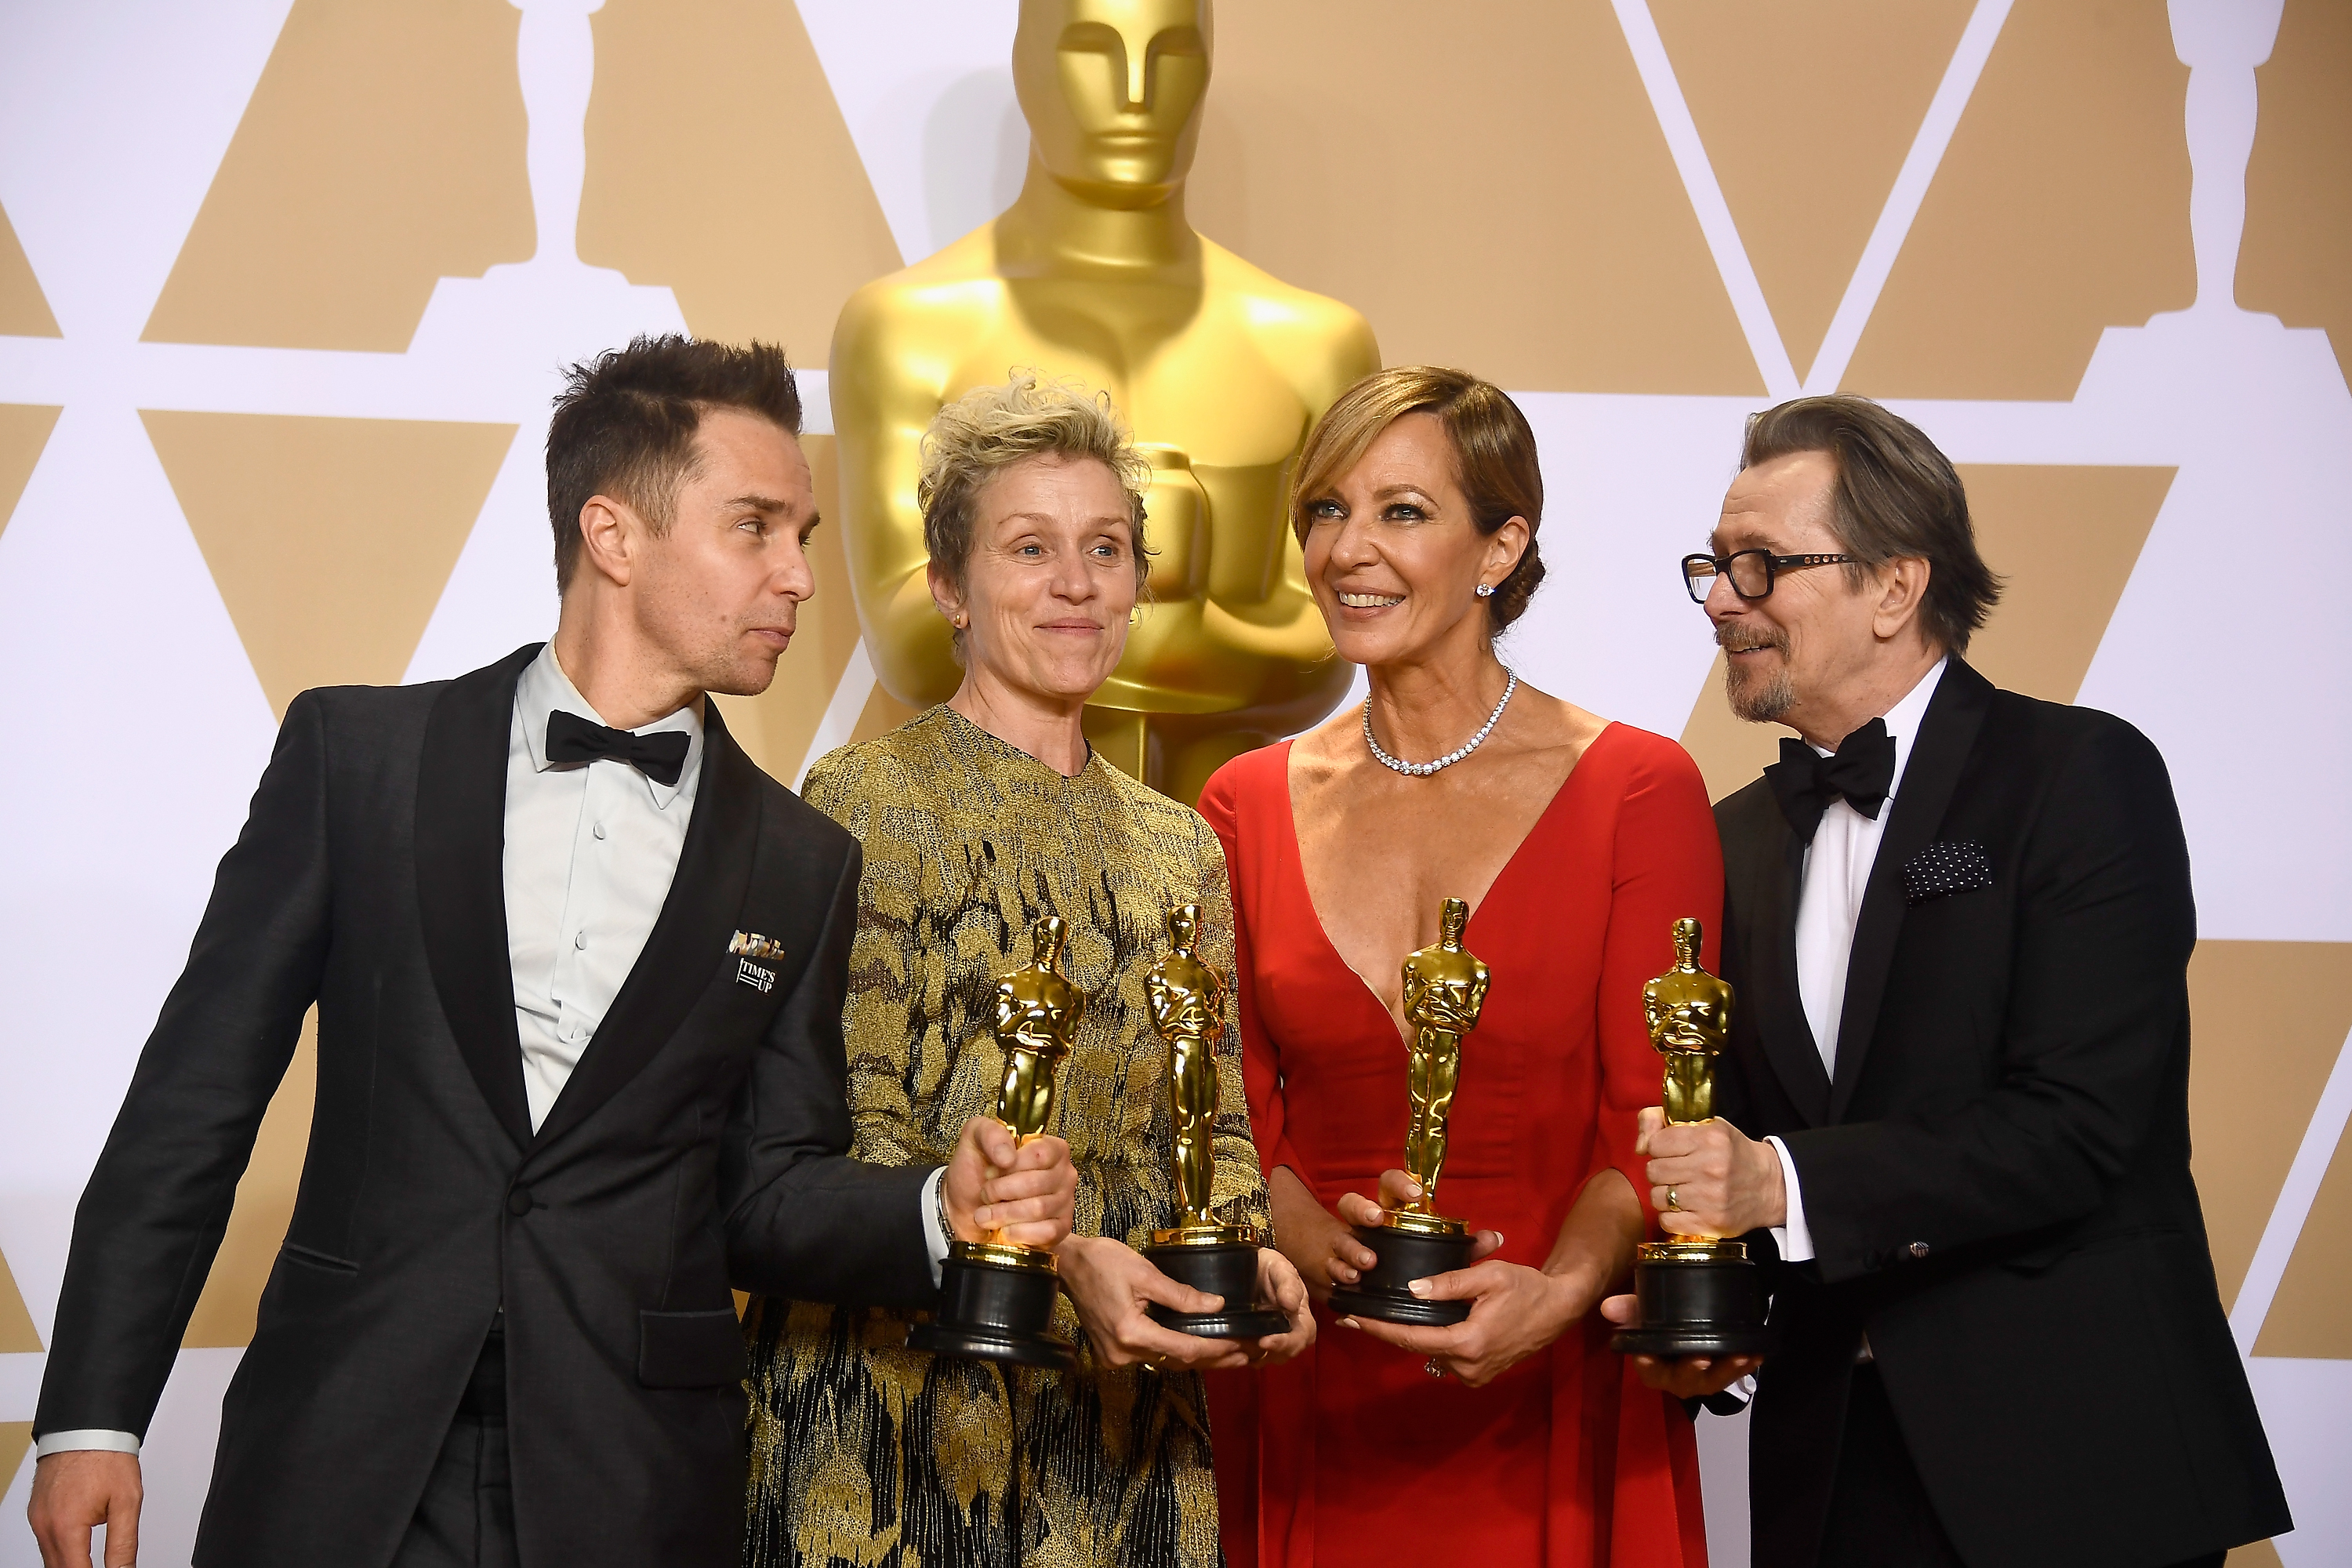 13 Outstanding Records Broken At The 90th Academy Awards